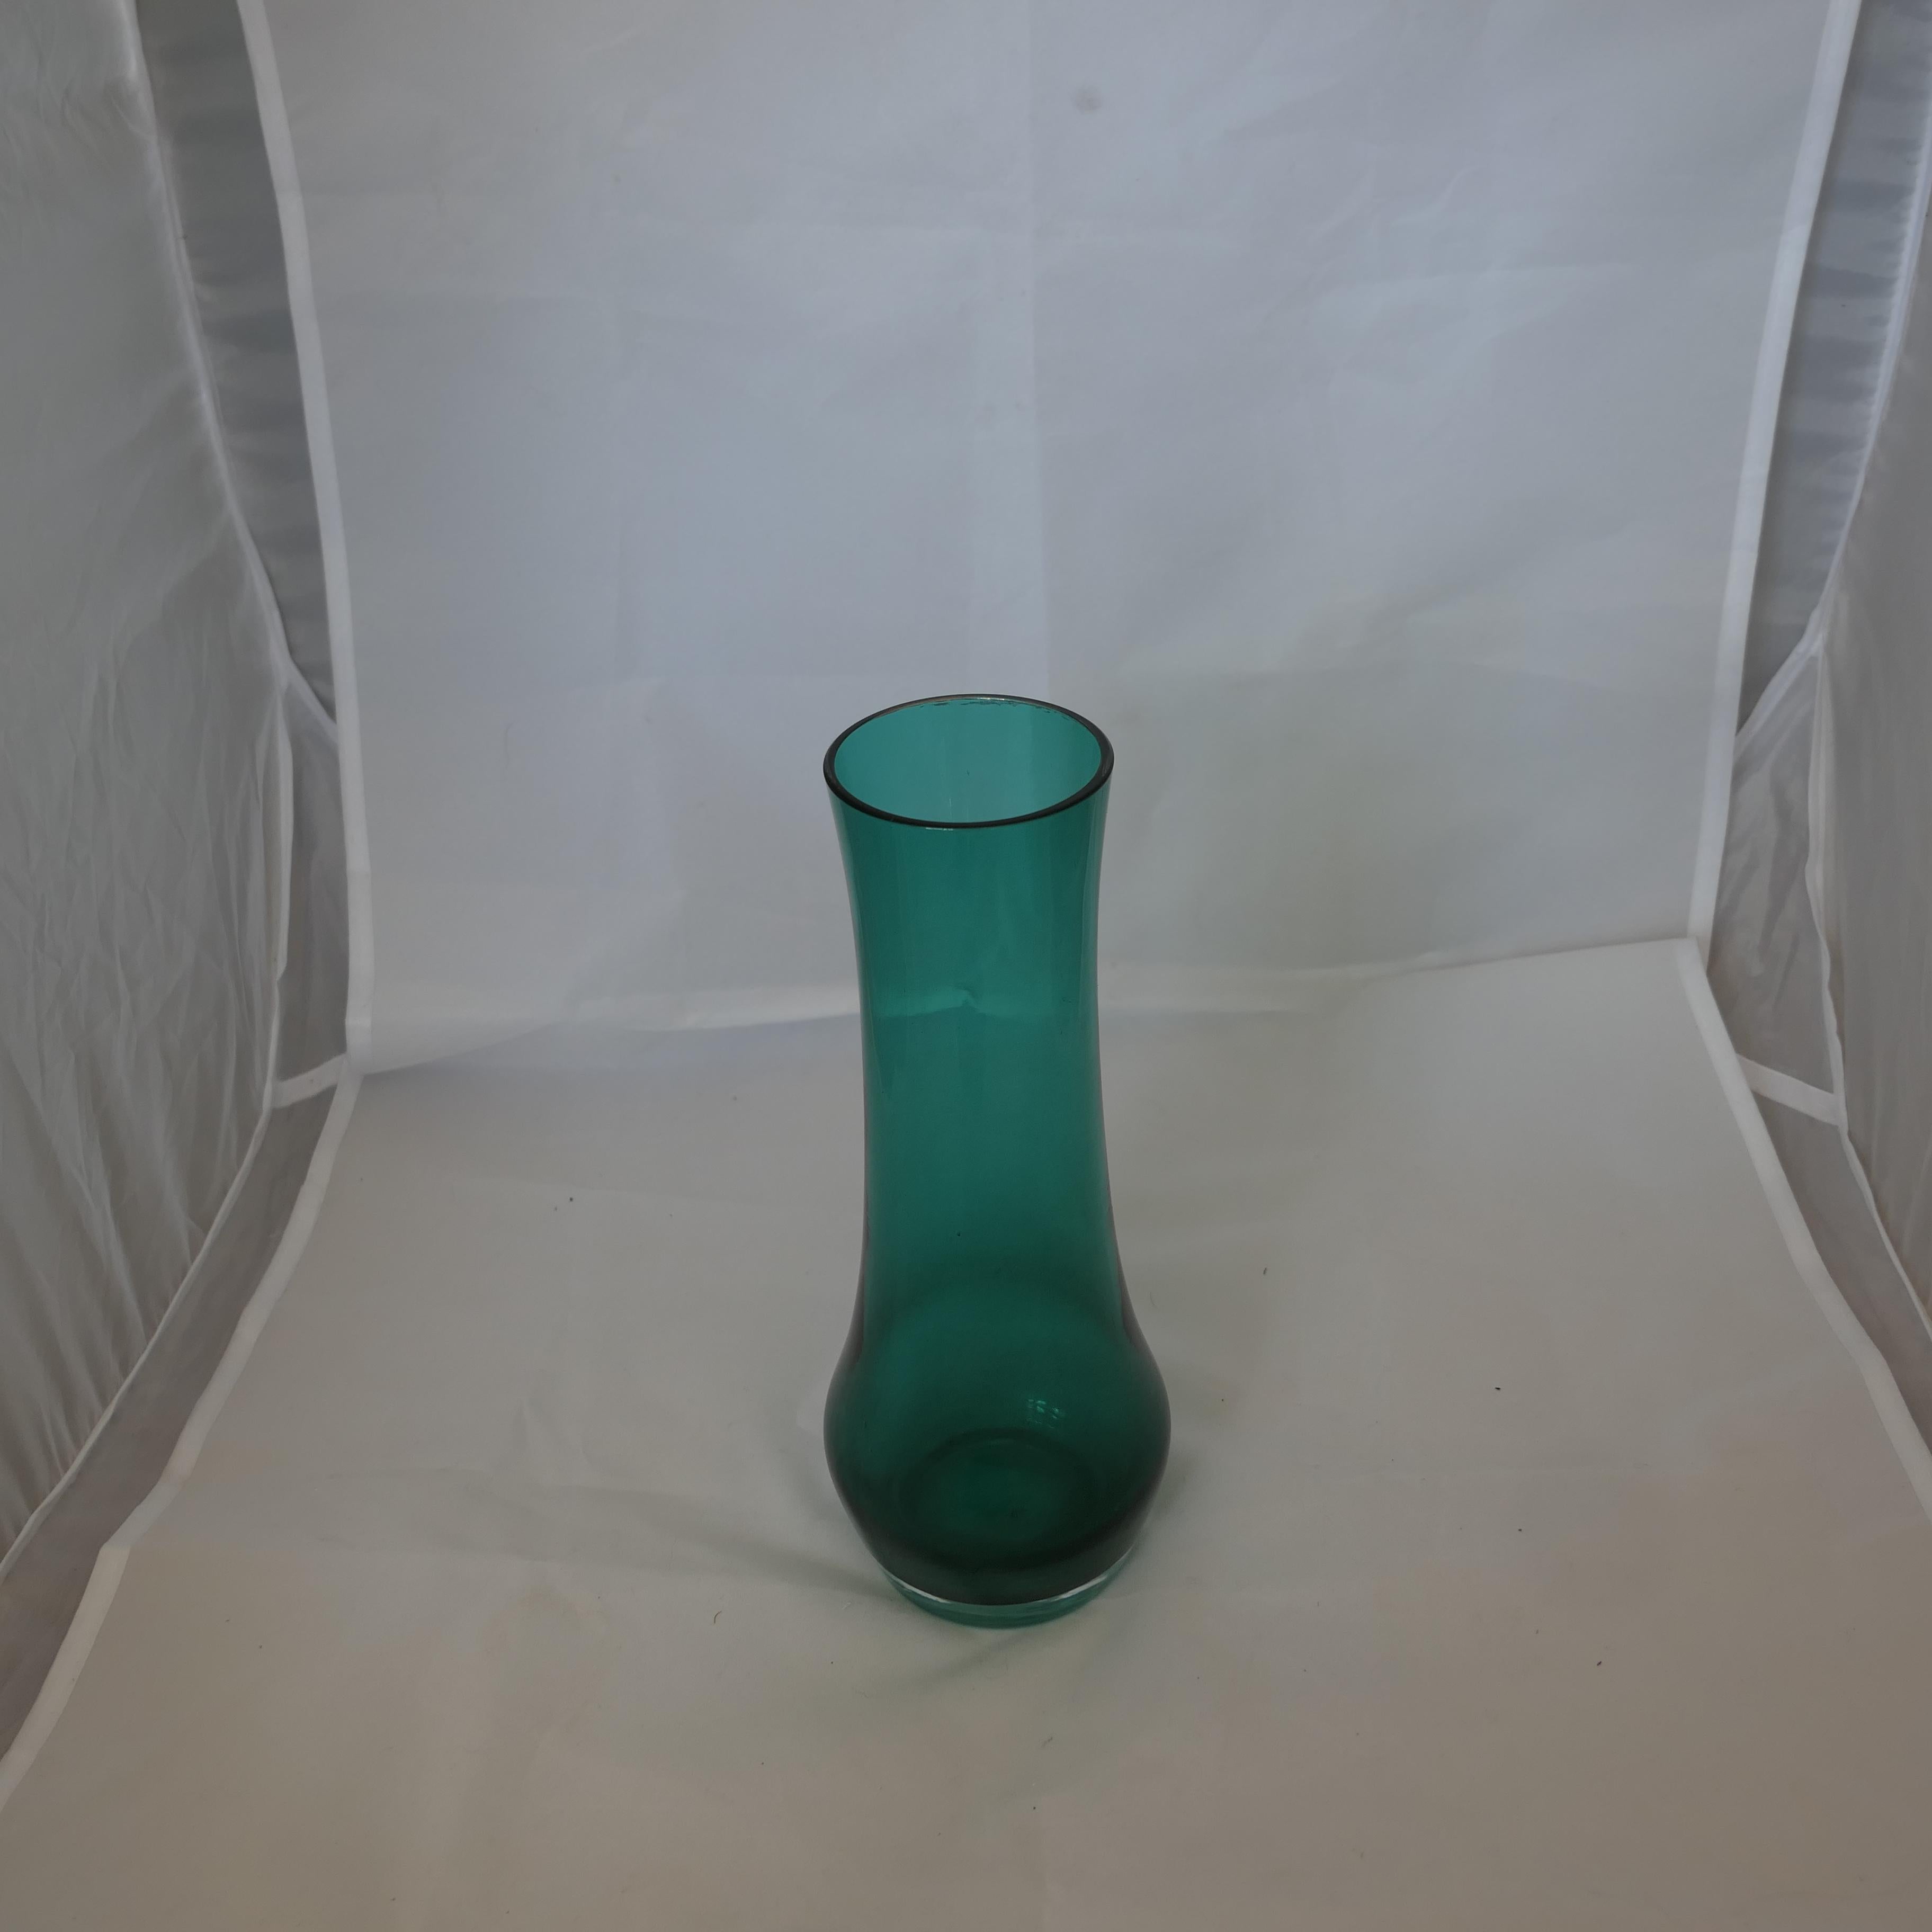 Mid-Century Modern 1960s Green Glass Vase by Tamara Aladin for Riihimäen Lasi Oy      For Sale